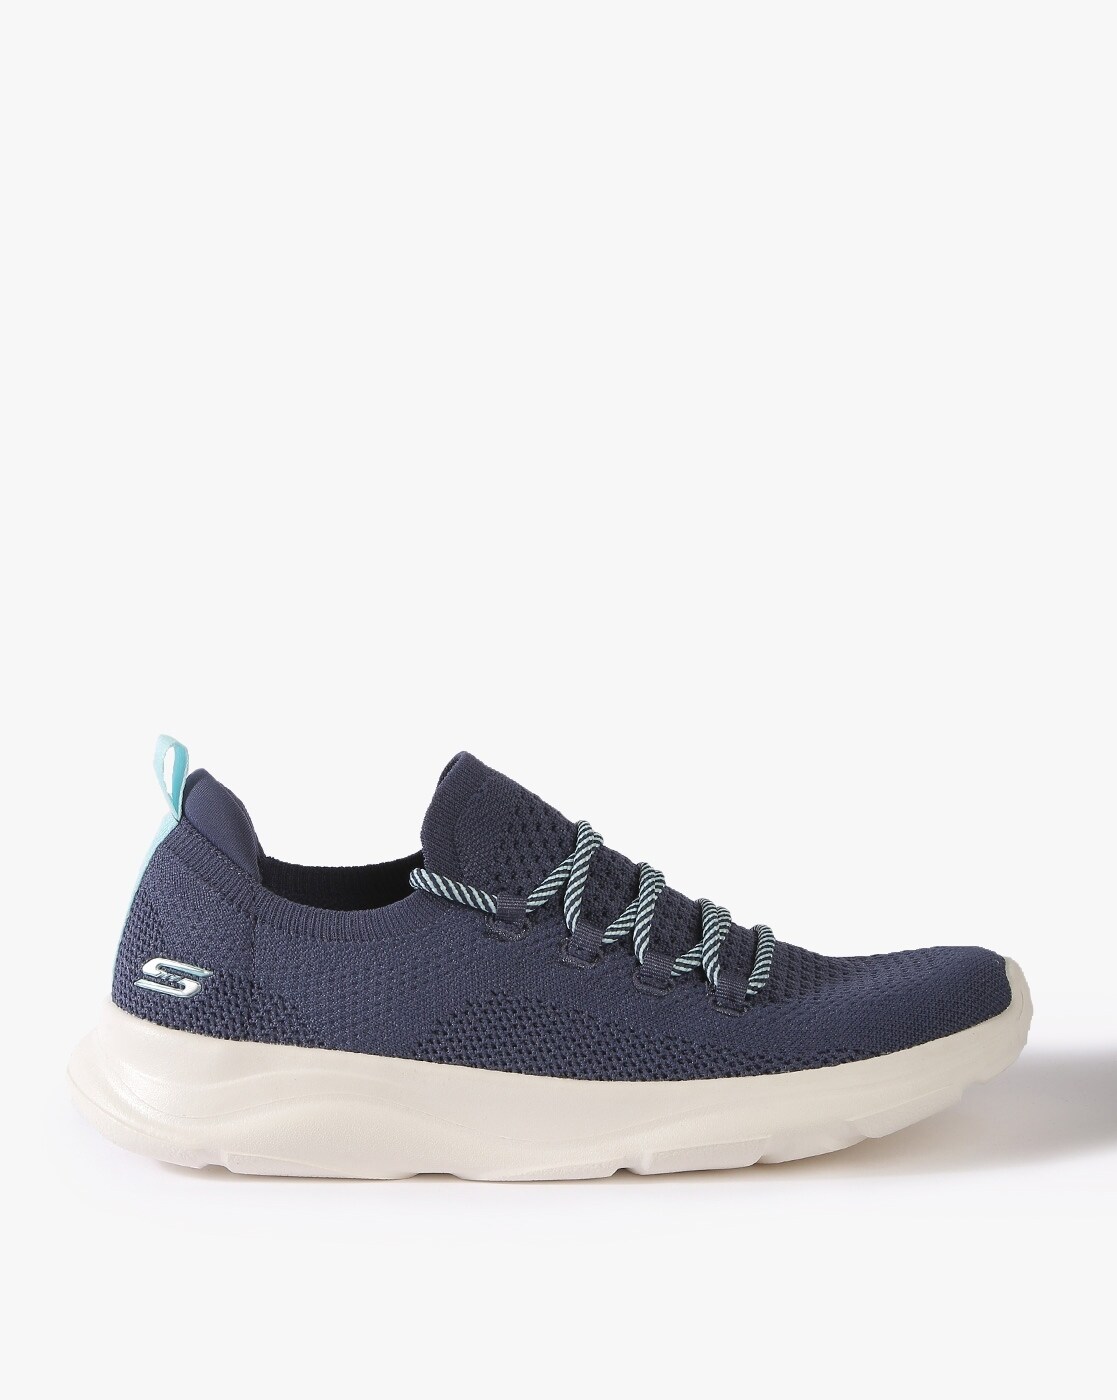 bobs navy blue shoes